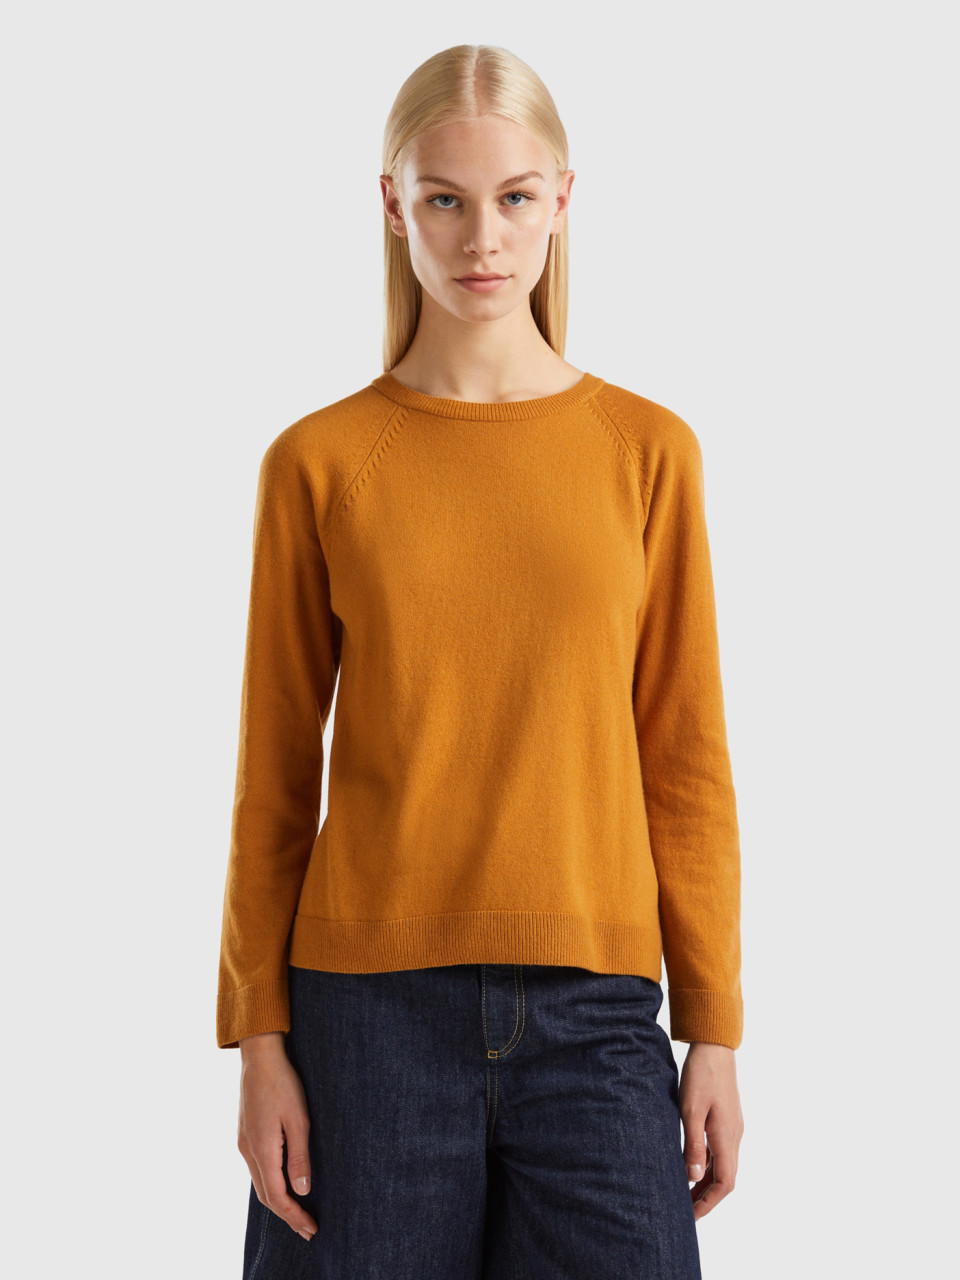 Benetton, Tobacco Crew Neck Sweater In Cashmere And Wool Blend, , Women